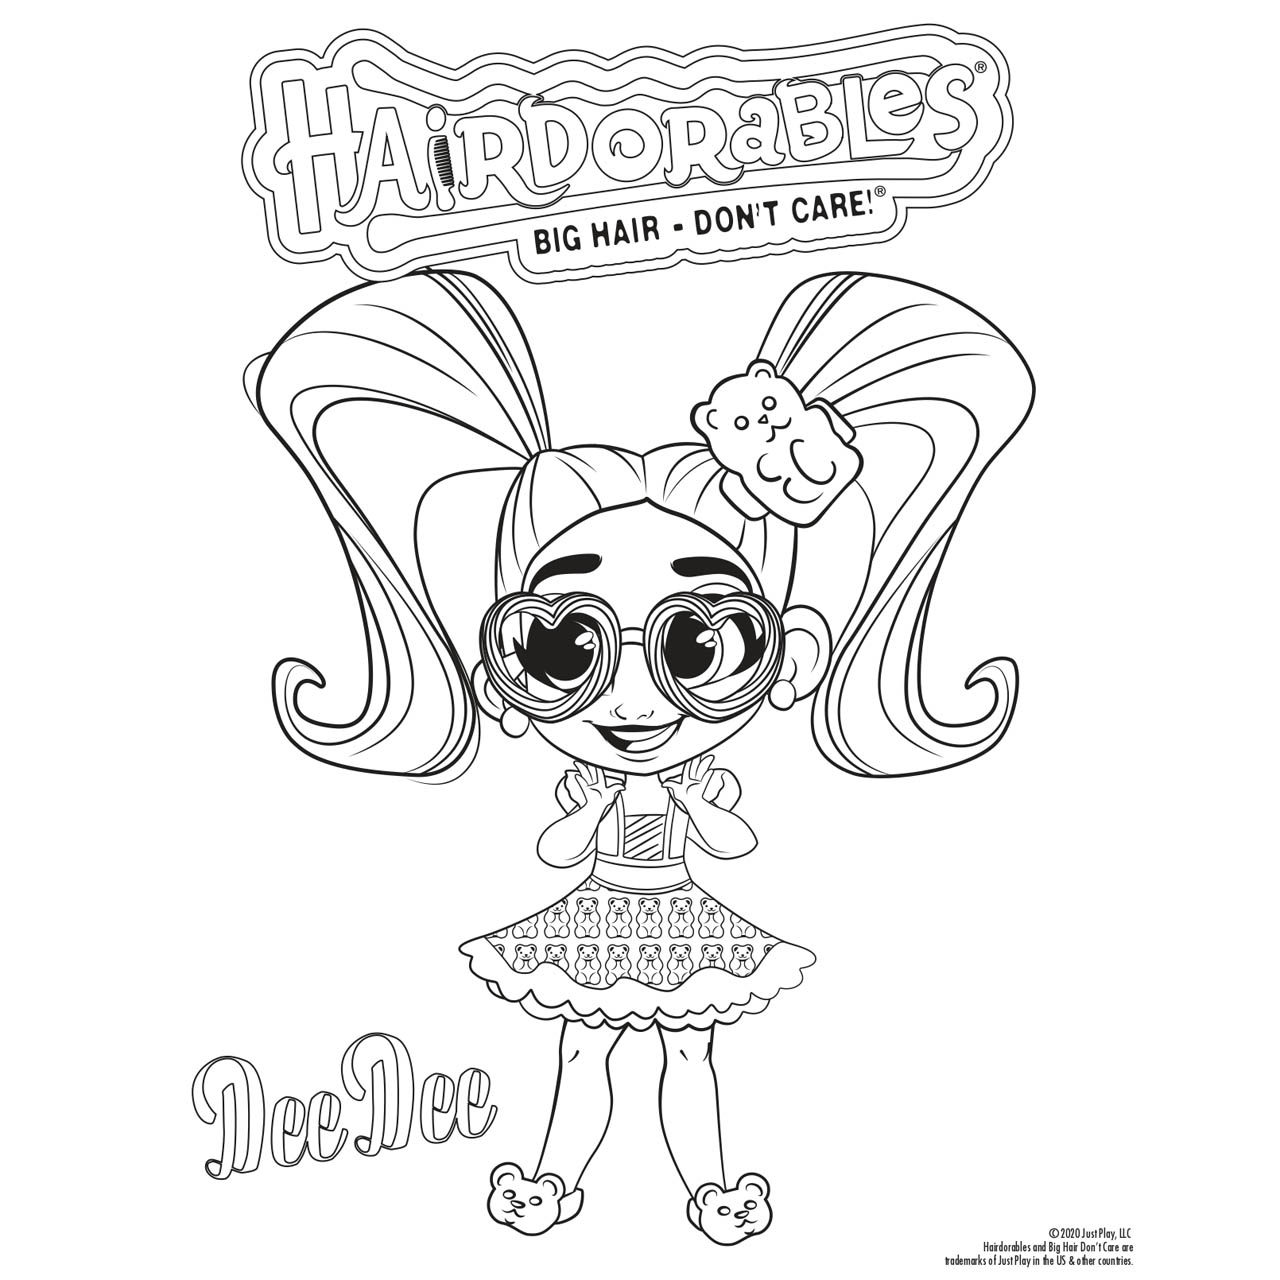 Free Hairdorables Coloring Pages Dee Dee with Glasses printable